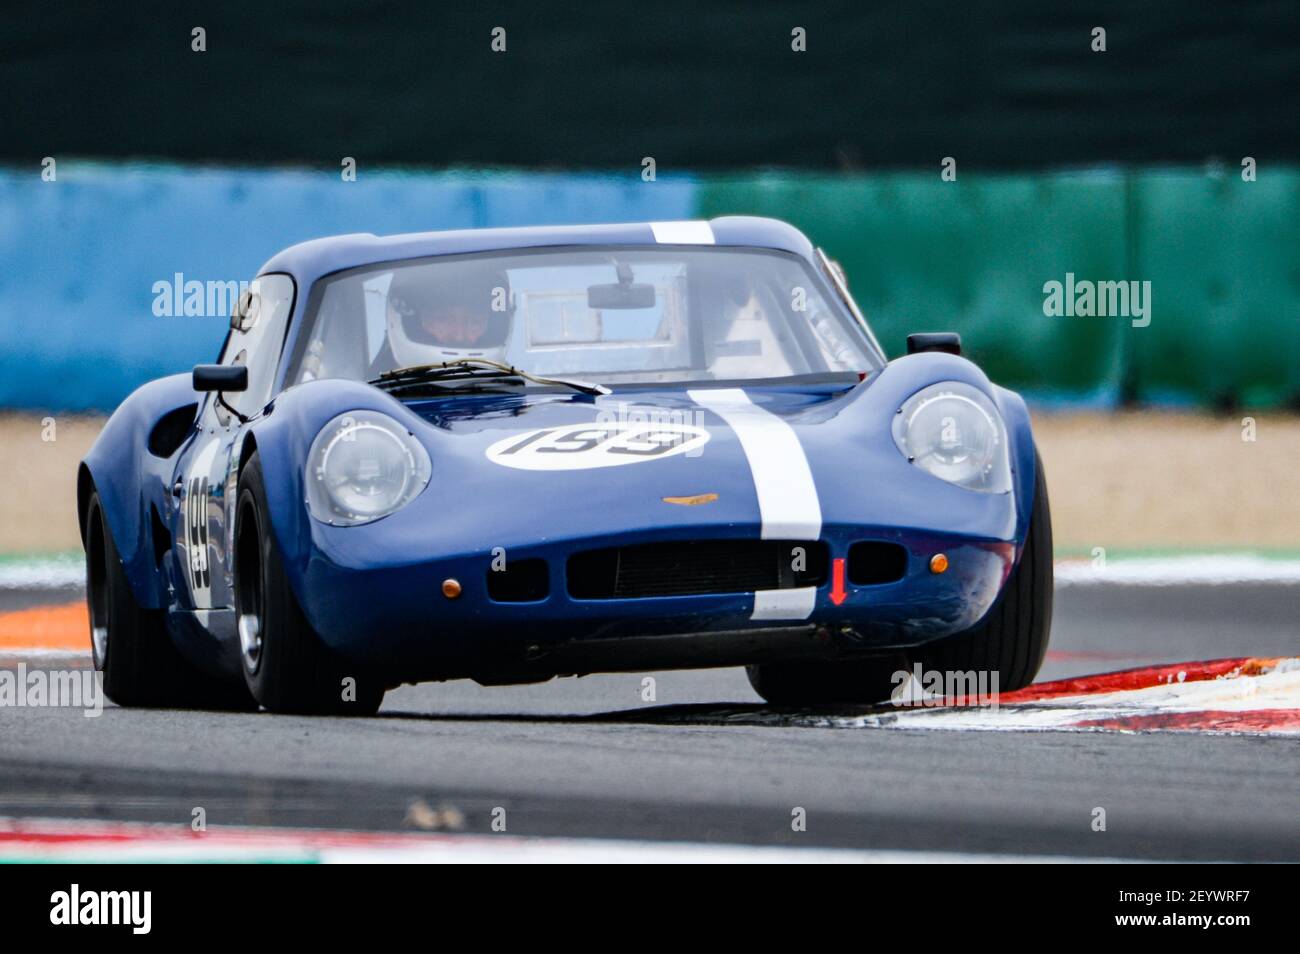 199 GUBNEY Frazer (gb), Chevron B8 - 2000, action during the Grand Prix de France Historique 2019 at Magny-Cours from July 29 to 30 - Photo Julien Delfosse / DPPI Stock Photo